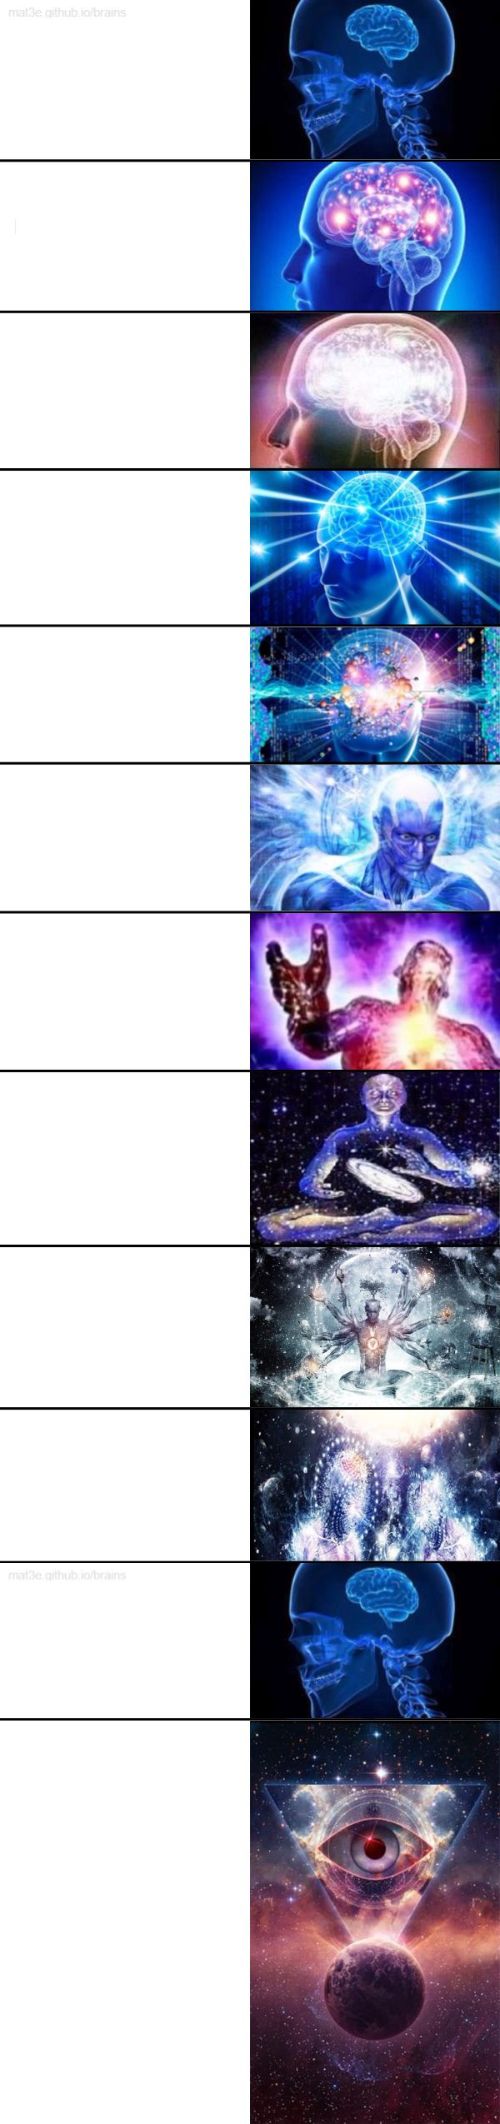 High Quality Expanded Brain 11 part with mental revert Blank Meme Template